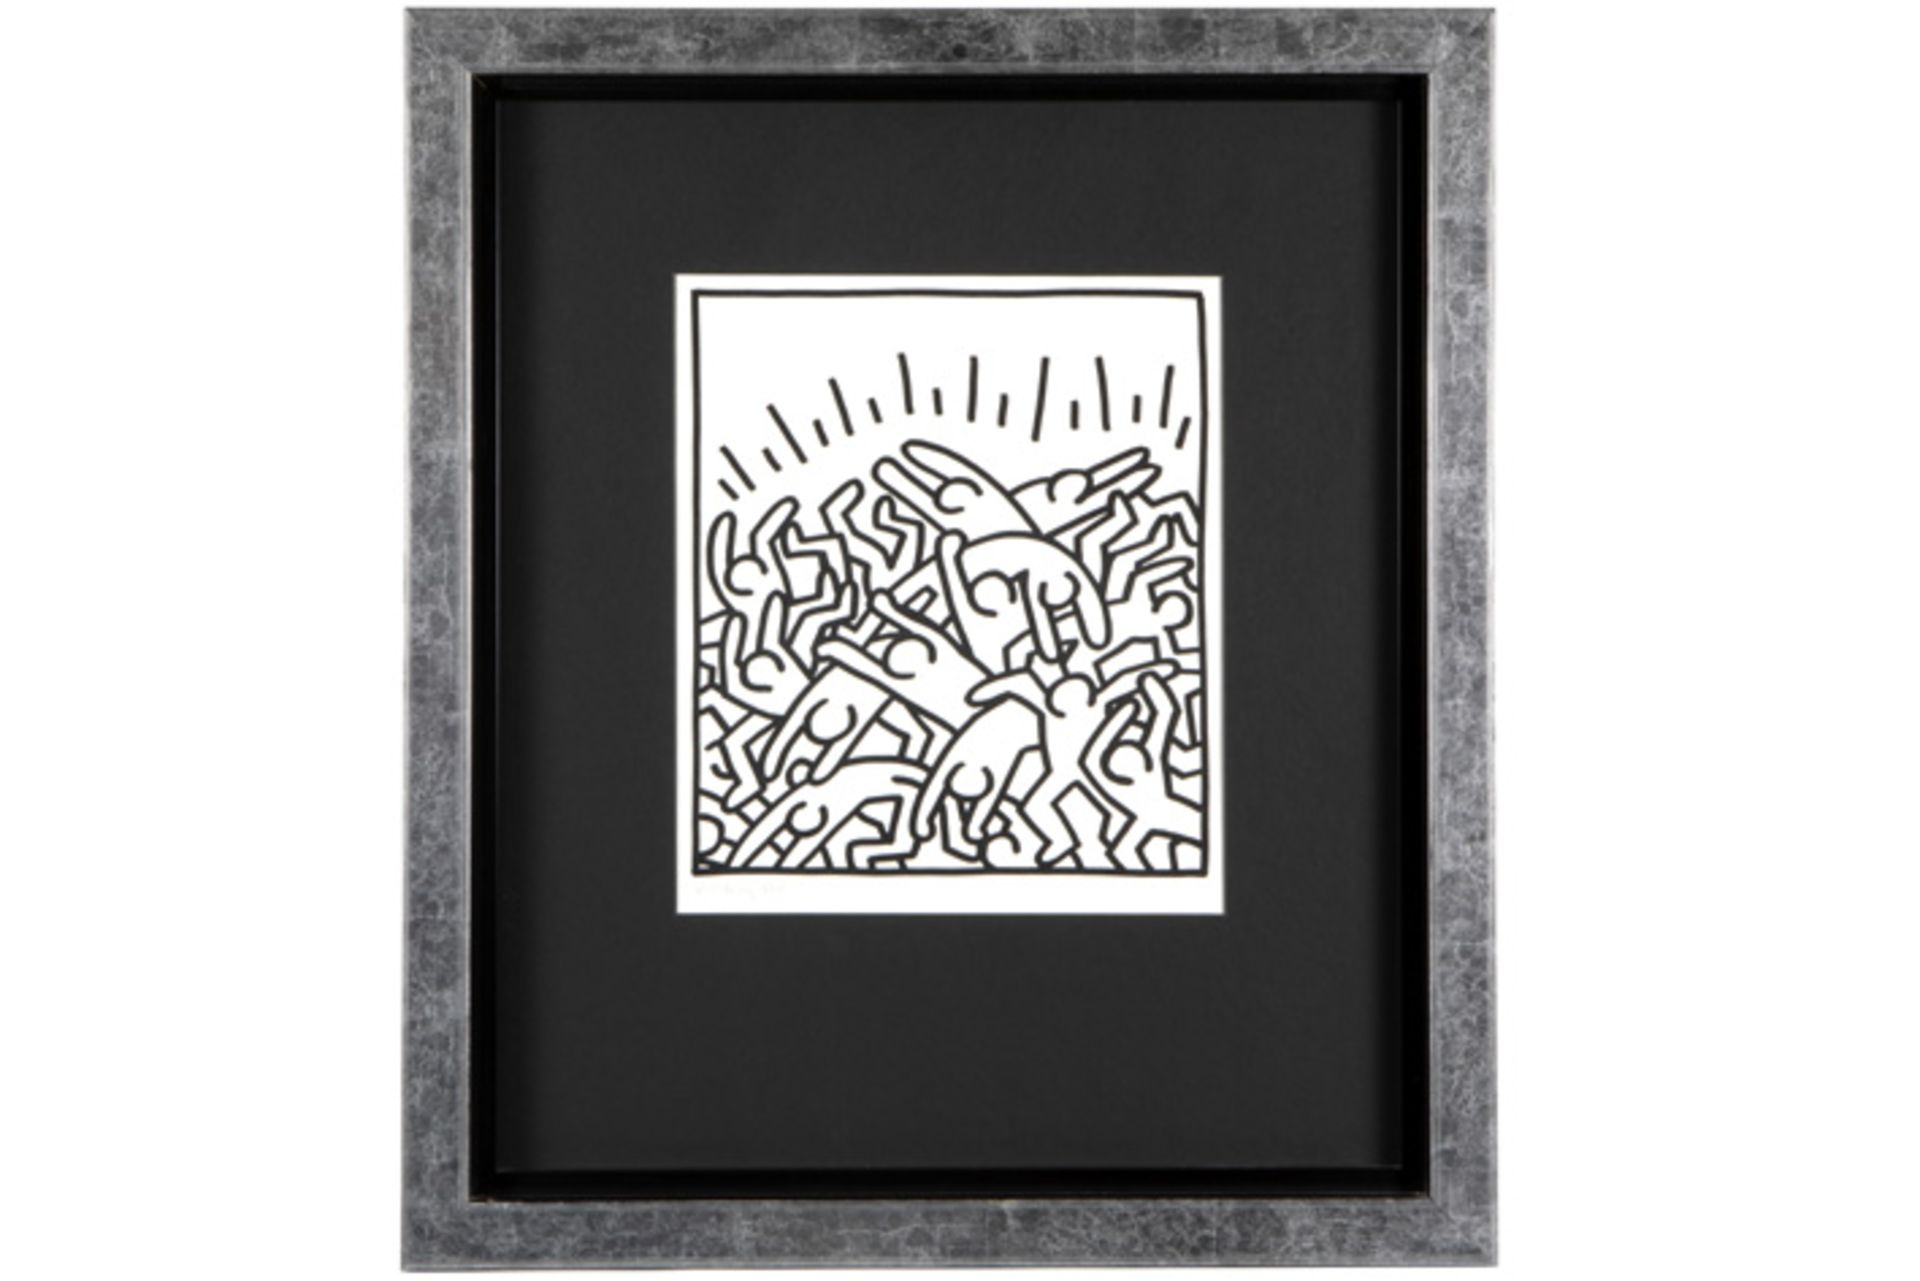 Keith Haring signed and (19)83 dated lithograph with on the back a attestation by the editor "Amelio - Image 3 of 4